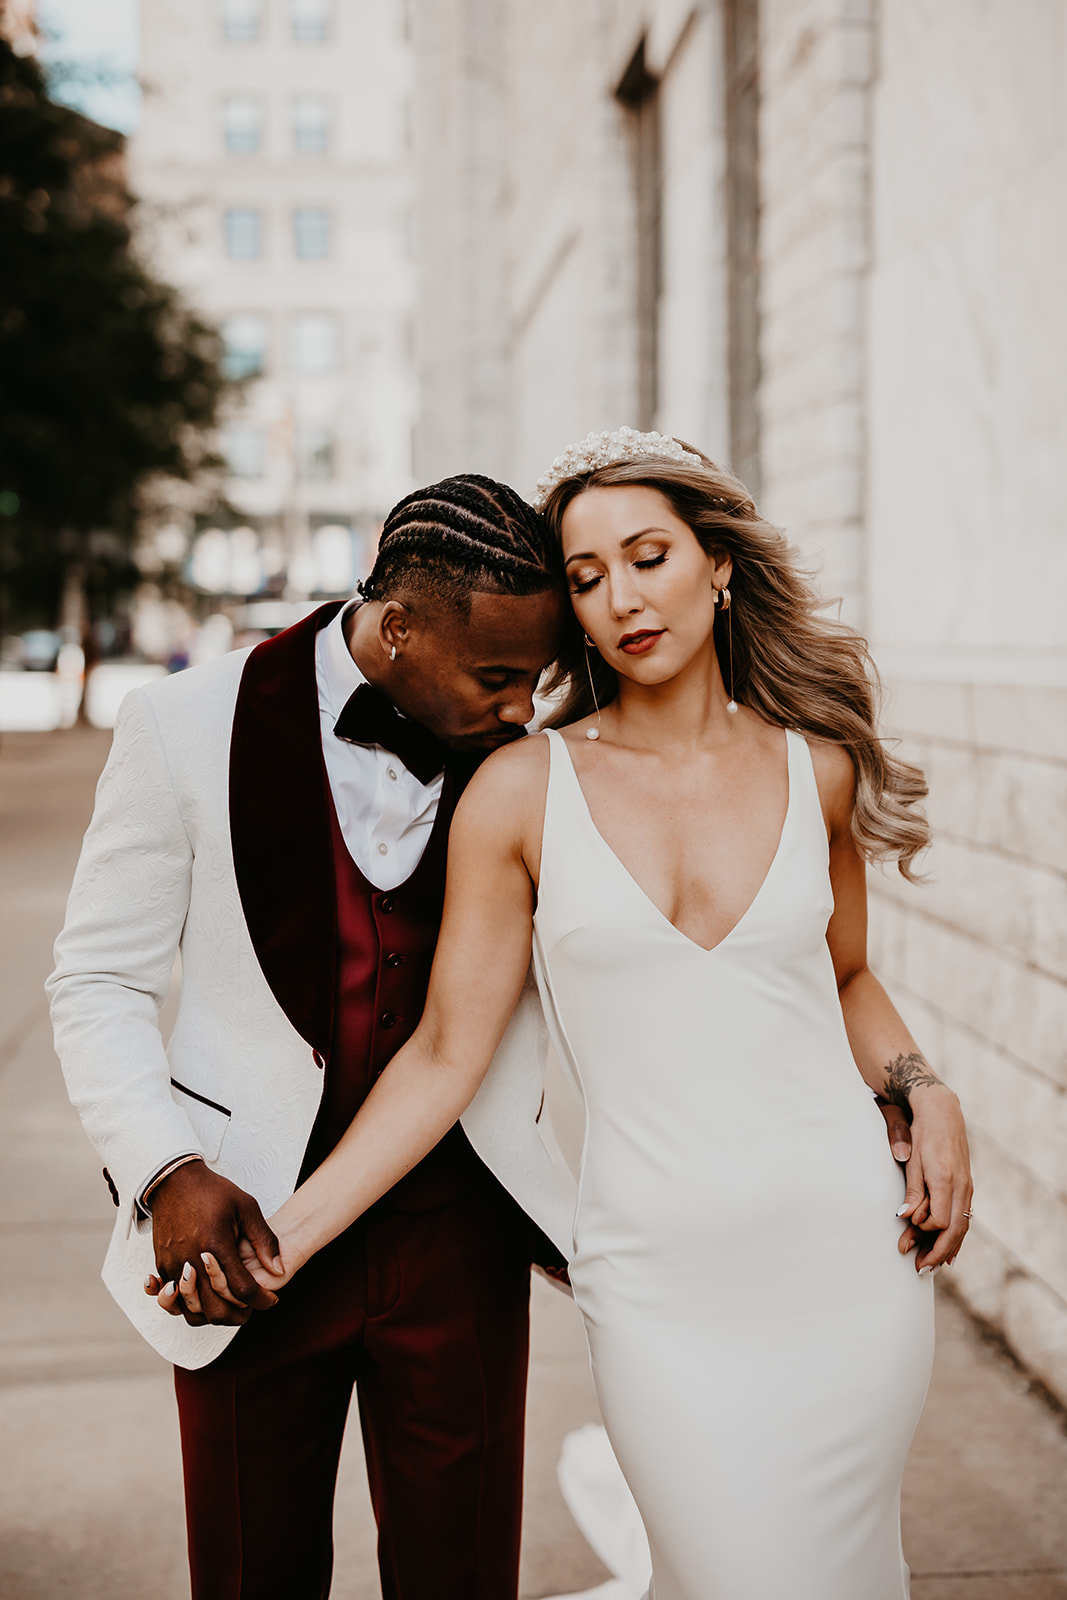 Urban chic wedding portrait in downtown Cleveland - capturing the couple's modern and fashionable aura.